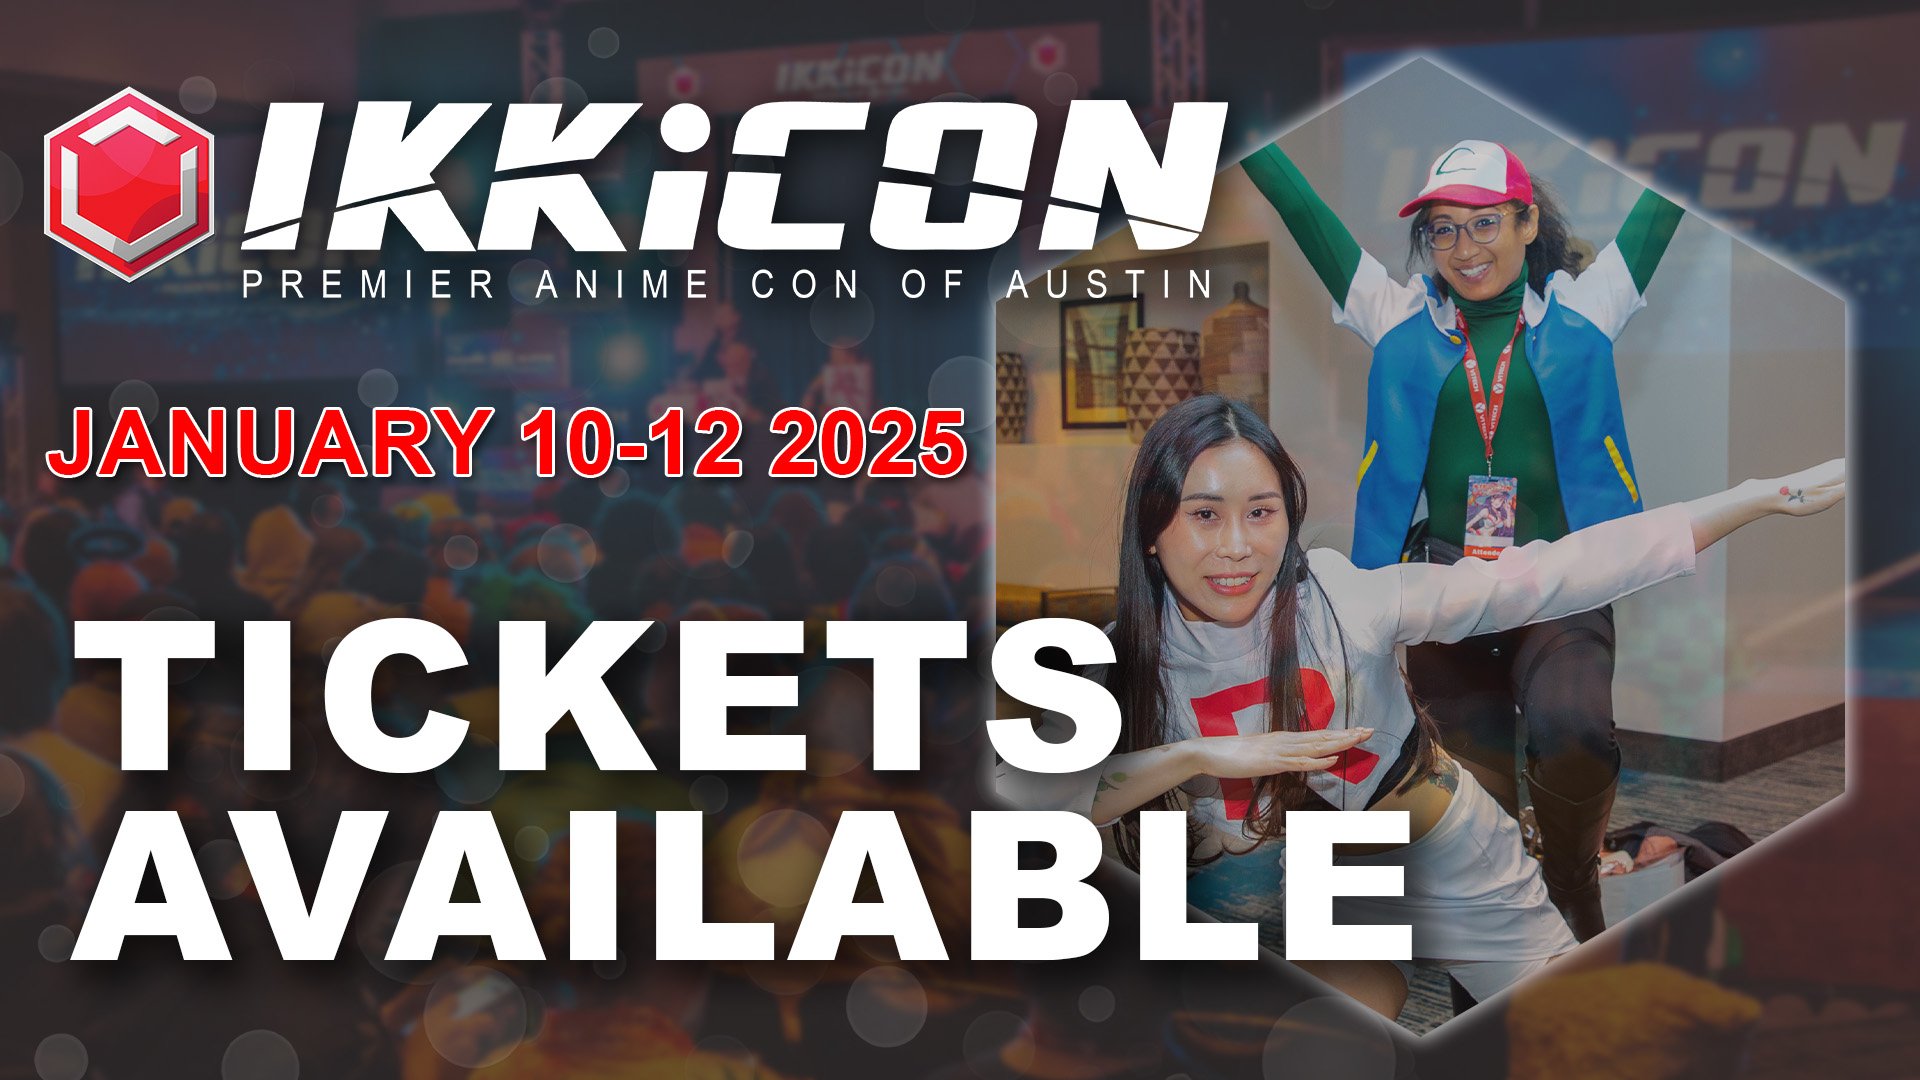 Get ready to geek out! 🎮🎉 #IKKiCON 2025 is coming to the Kalahari Resort on January 10-12, 2025! Don't wait &ndash; snag your tickets today and join the ultimate anime adventure! https://www.ikkicon.com/tickets
.
.
.
.
.
 #AnimeAdventure #otakulife